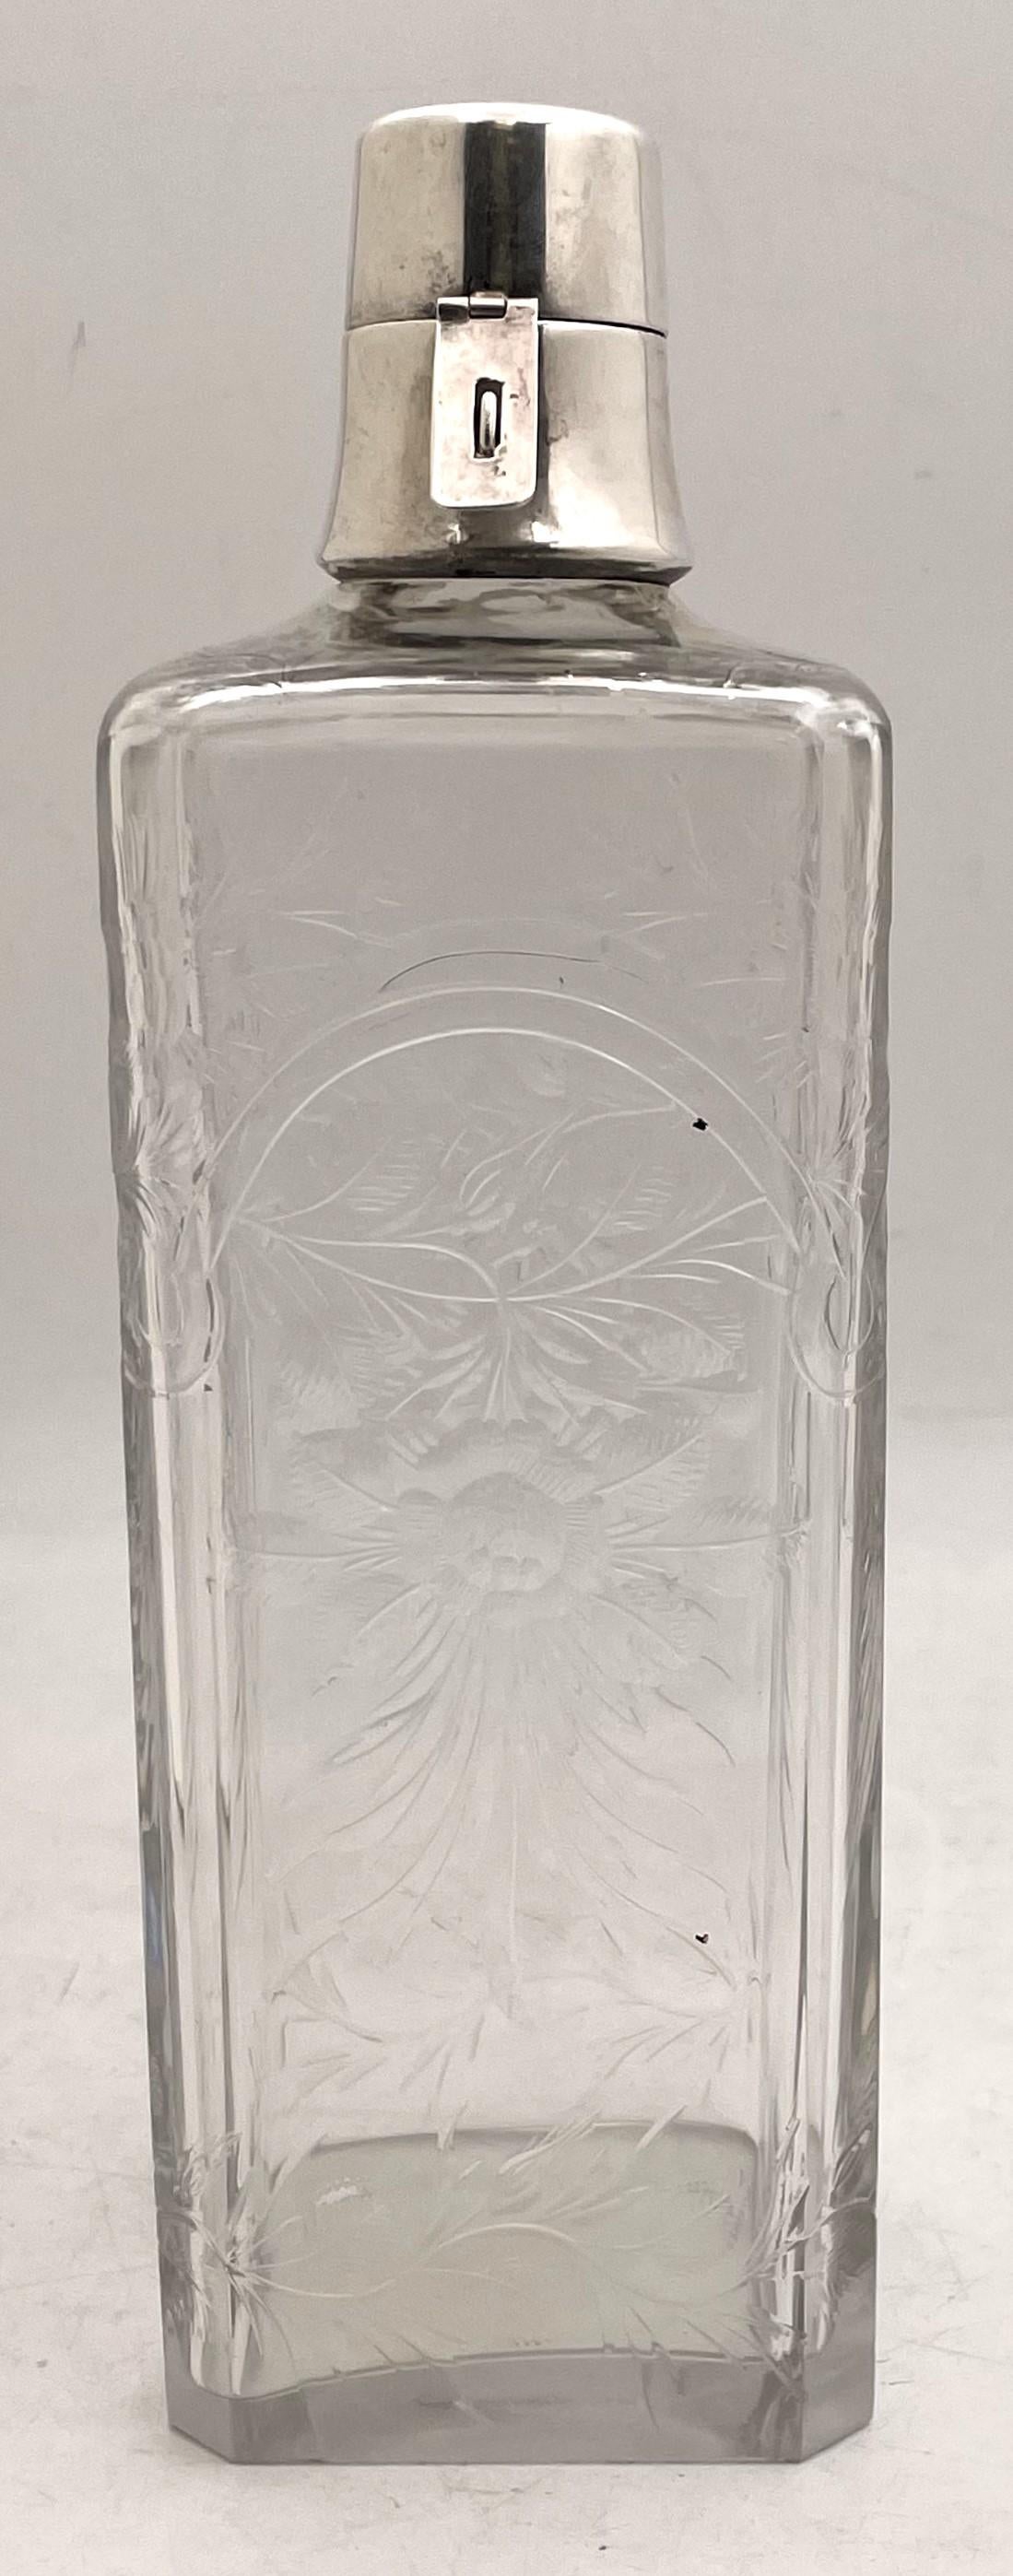 Hawkes decanter with a sterling silver cap and made of beautifully etched glass showcasing floral and natural motifs. From the early 20th century, it is in a geometrically inclined Art Deco style, measures 10 3/4'' in height by 3 1/2'' in depth, and